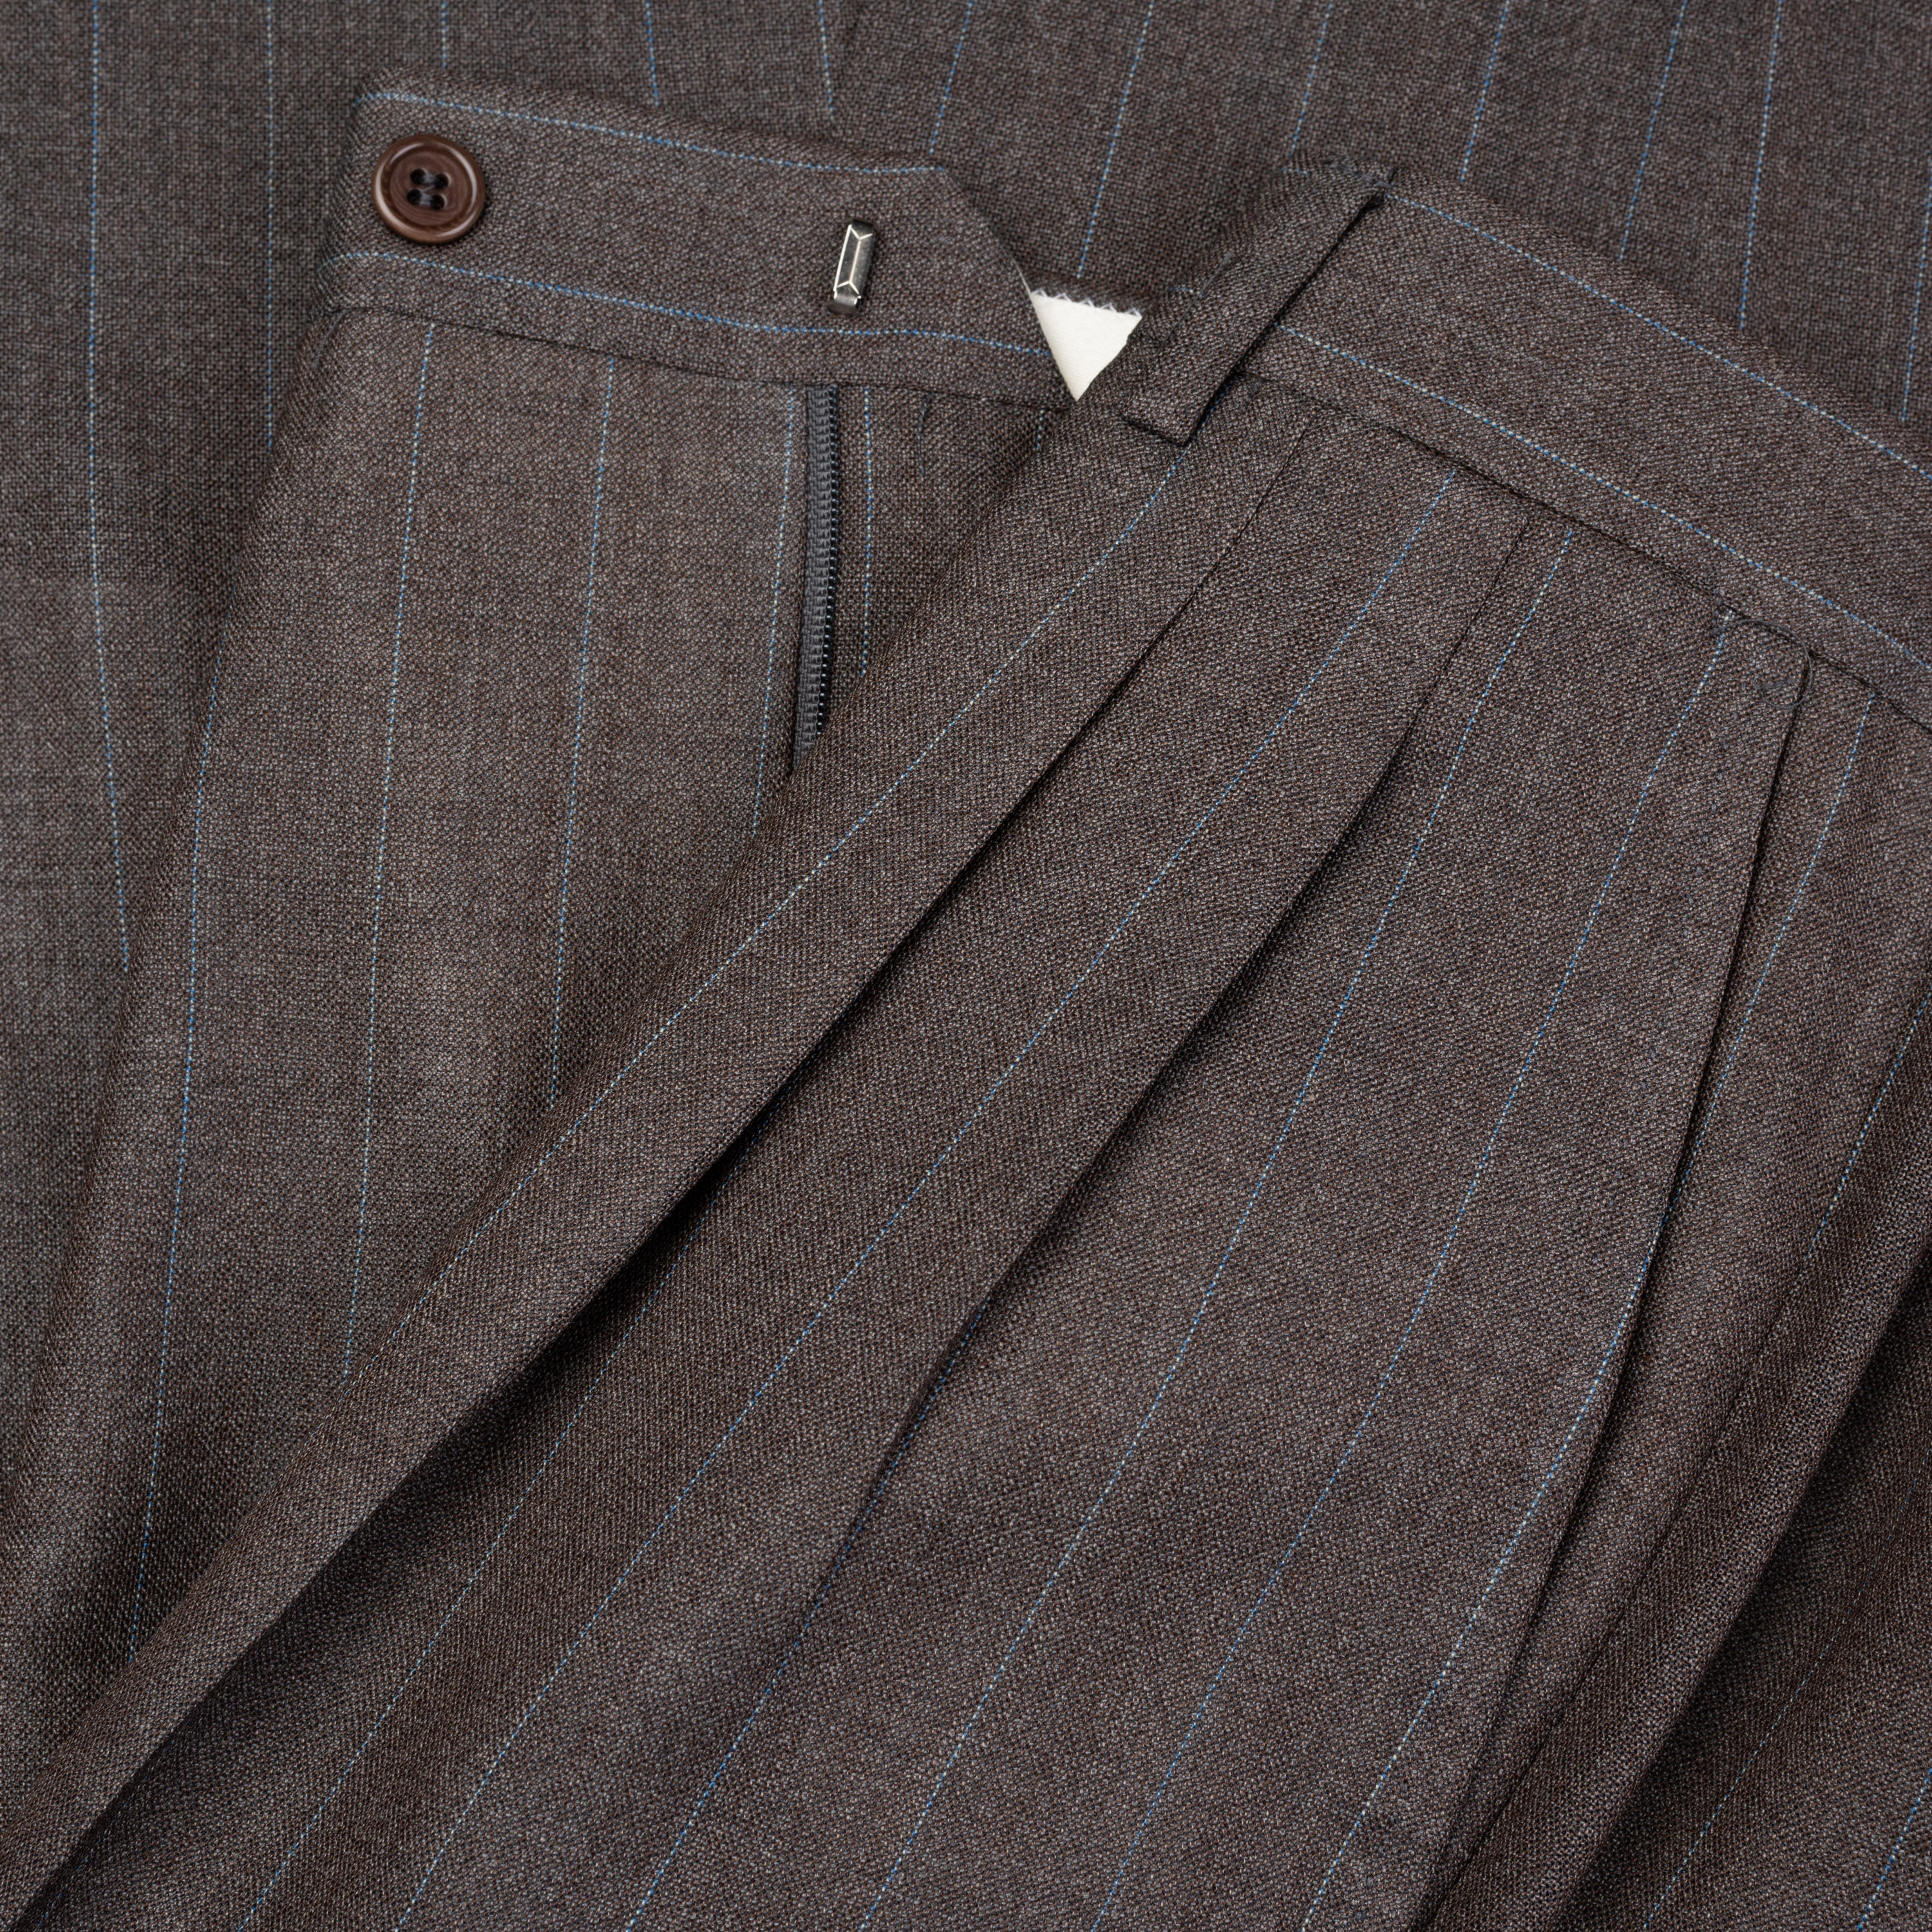 CASTANGIA 1850 Gray Striped Wool-Mohair Business Suit EU 50 NEW US 40 CASTANGIA